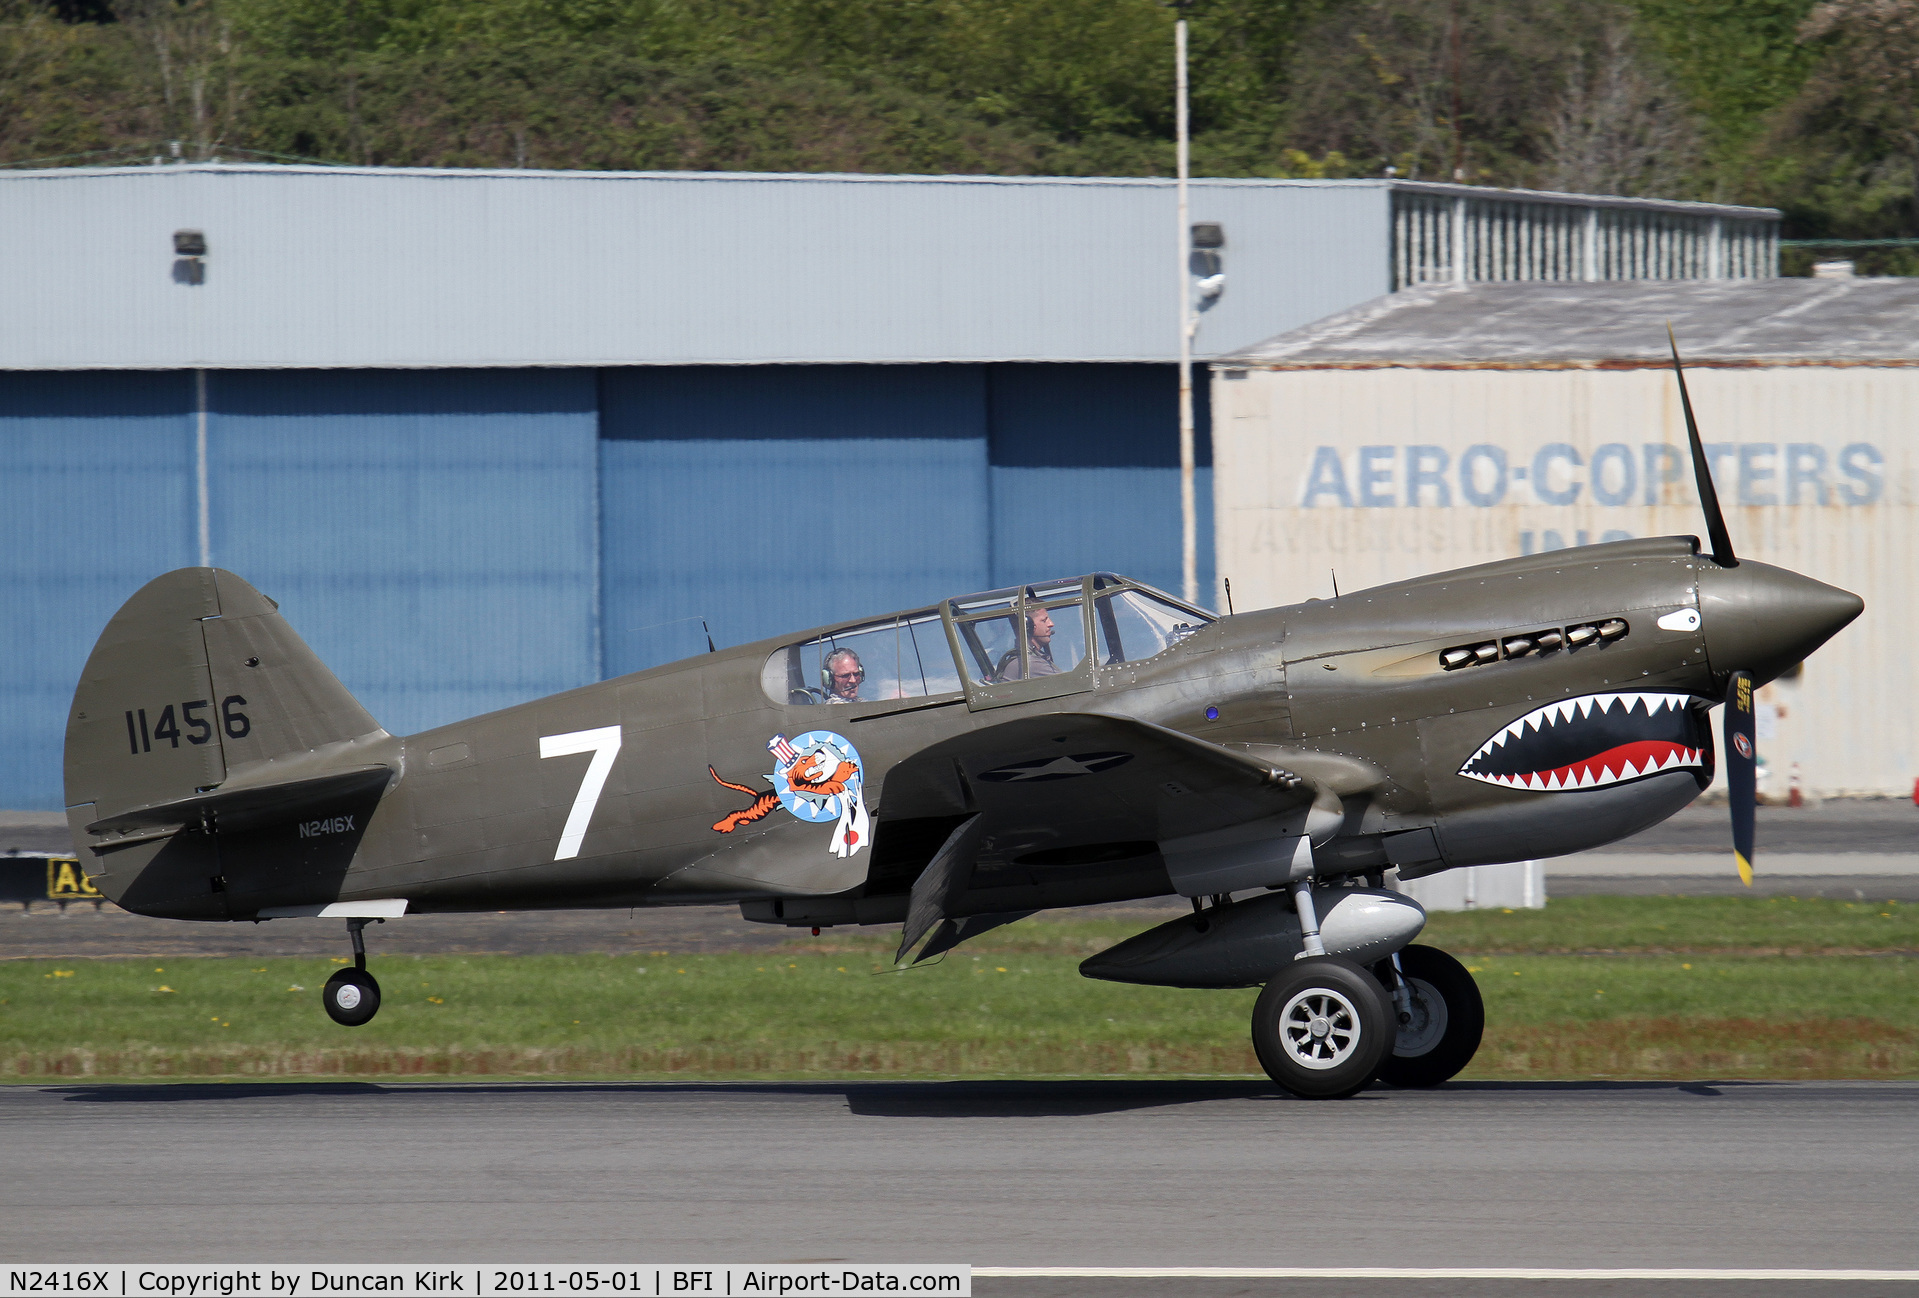 N2416X, Curtiss P-40E Warhawk C/N 16701, Returning from another joy ride